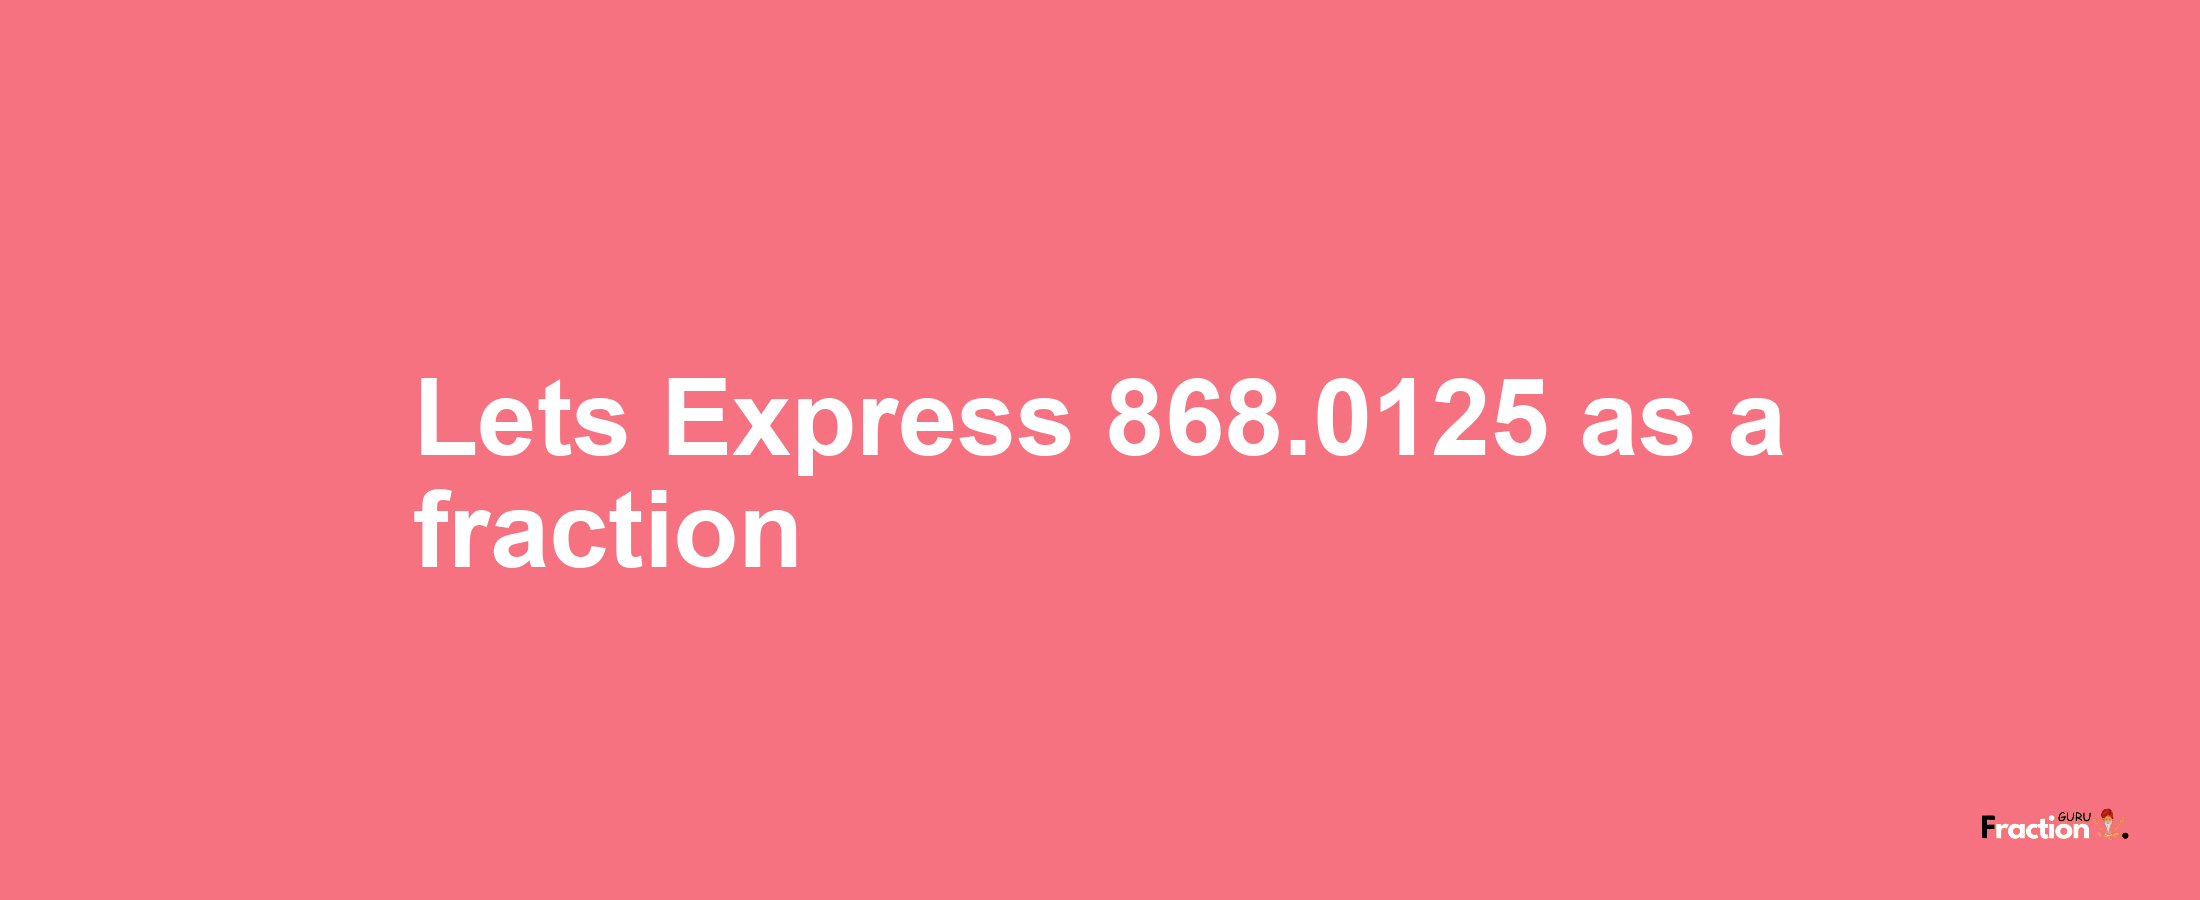 Lets Express 868.0125 as afraction